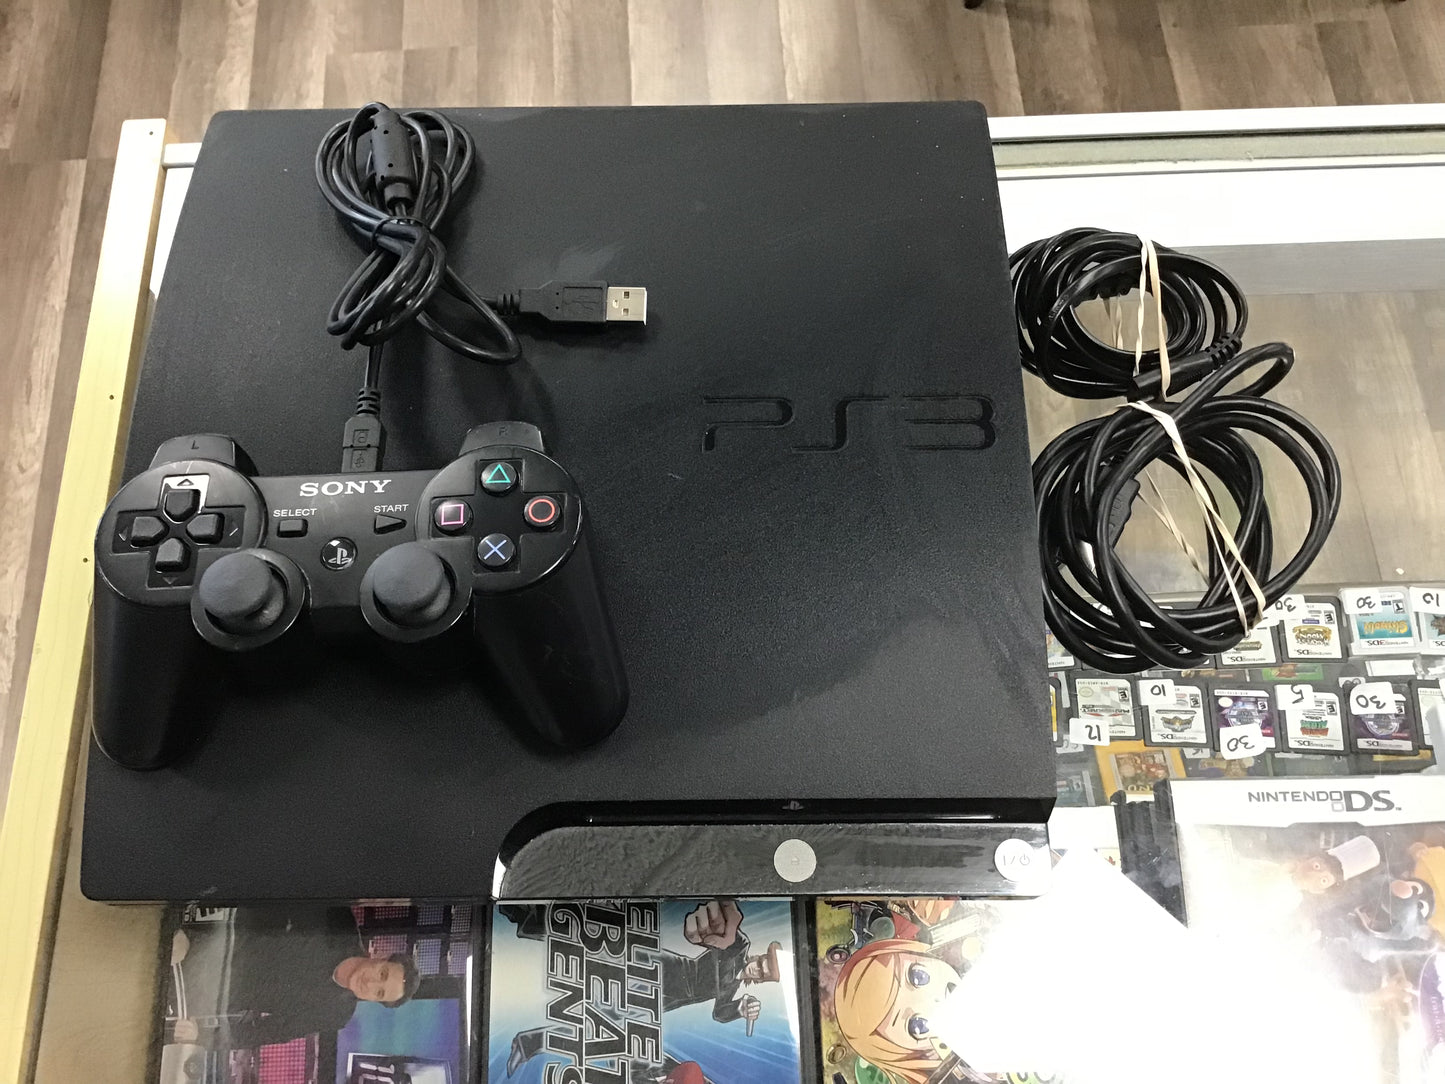 PlayStation 3 Slim System with wires and one controller